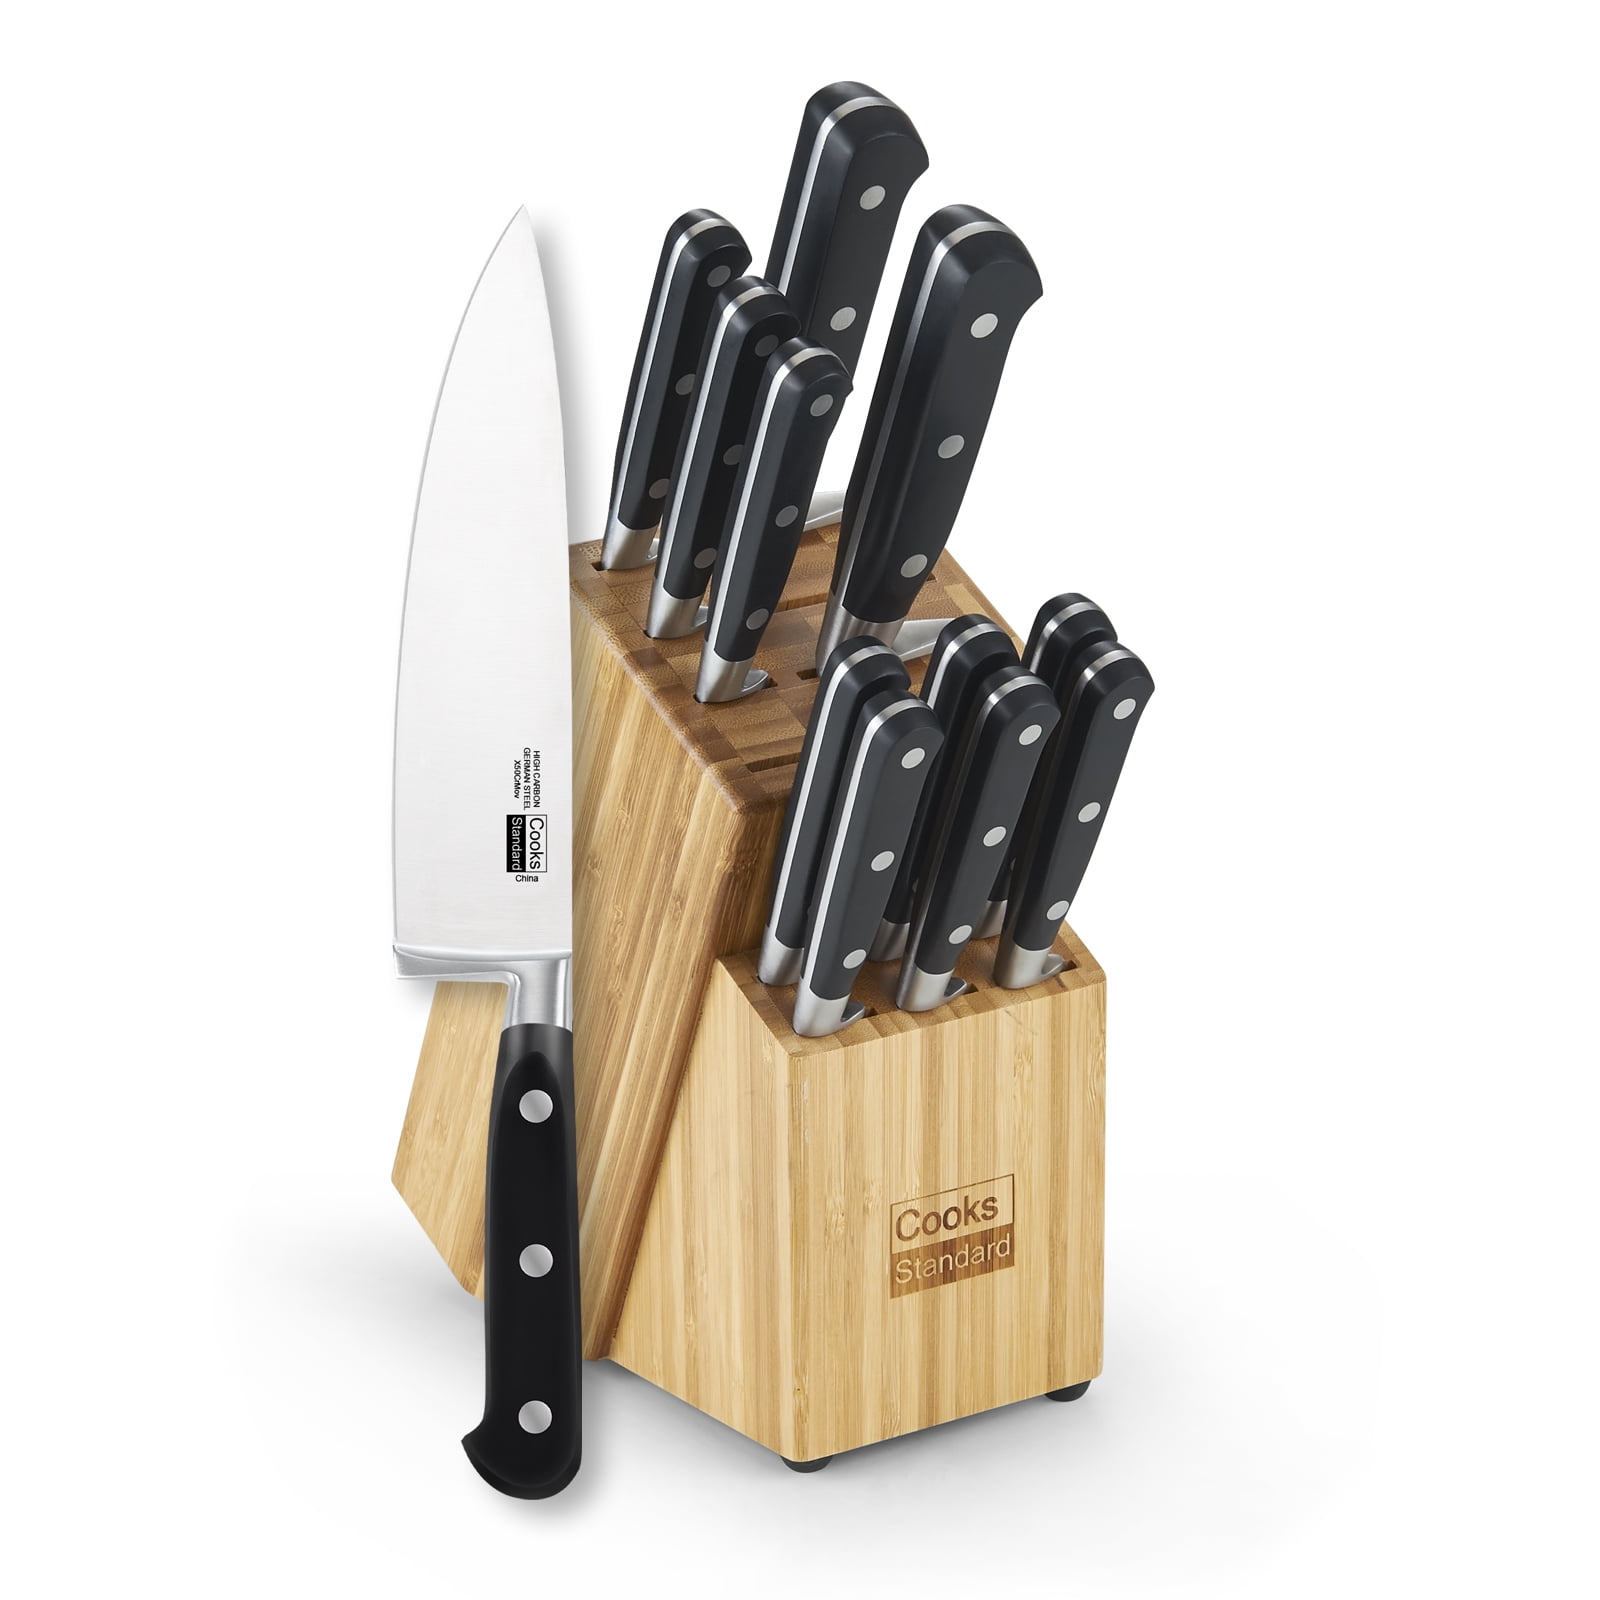 Cuisinart 12 Piece Printed Color Knife Set with Blade Guards